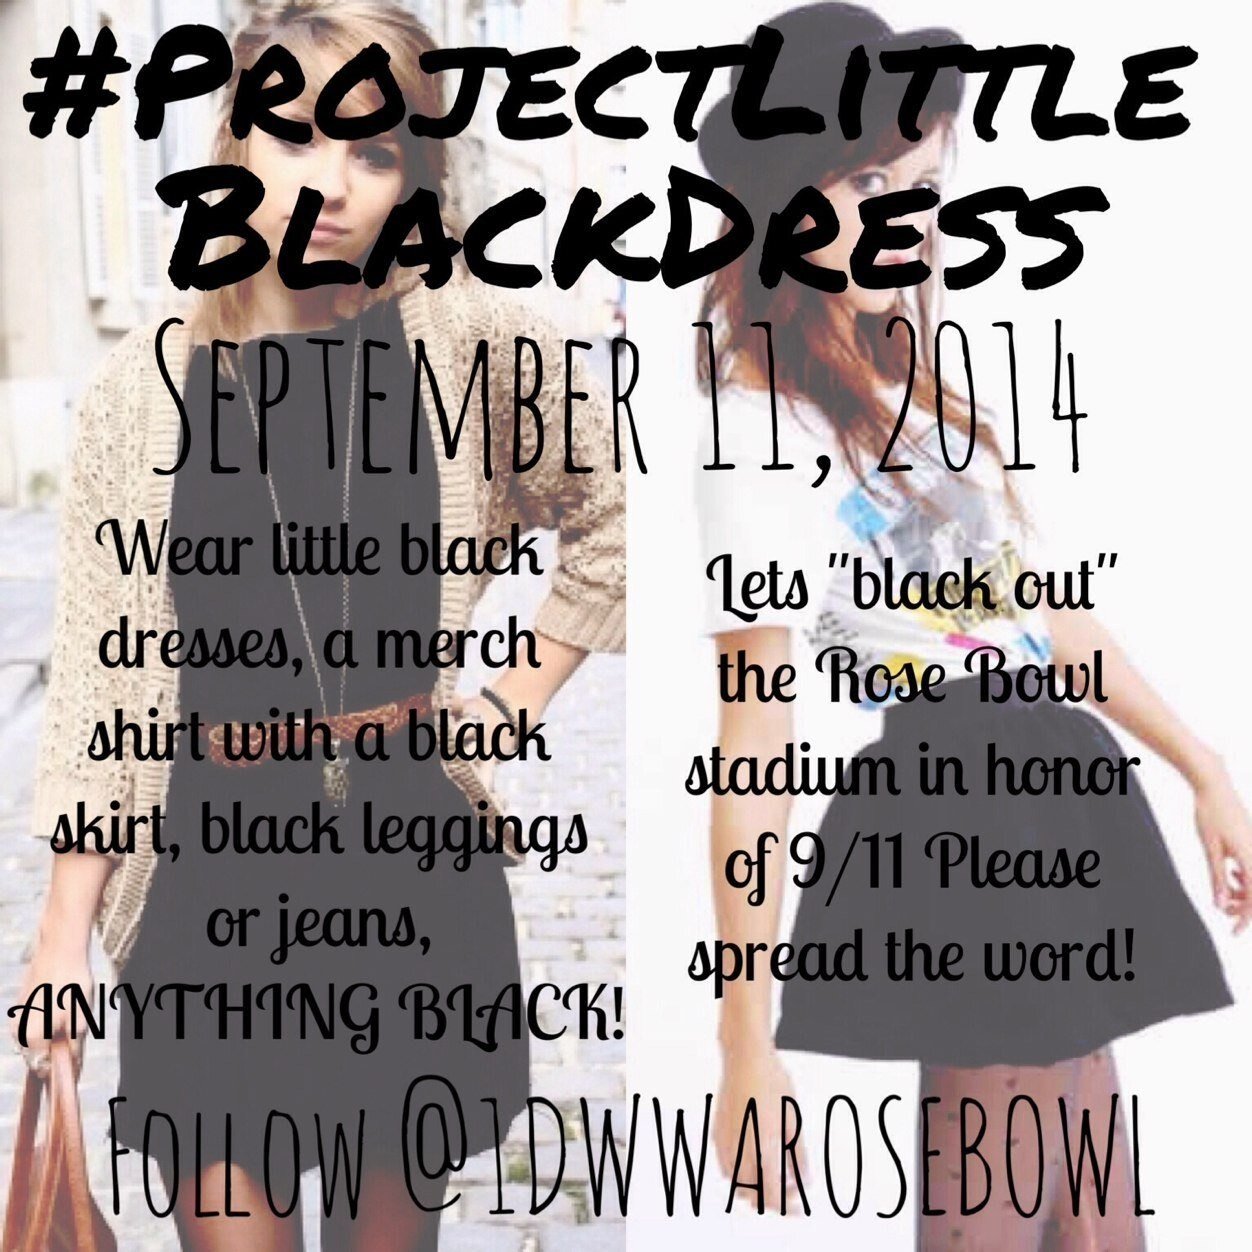 All of you who are attending to the concert on sep 11, wear BLACK to pay our respects. Follow @1DWWArosebowl for more information!